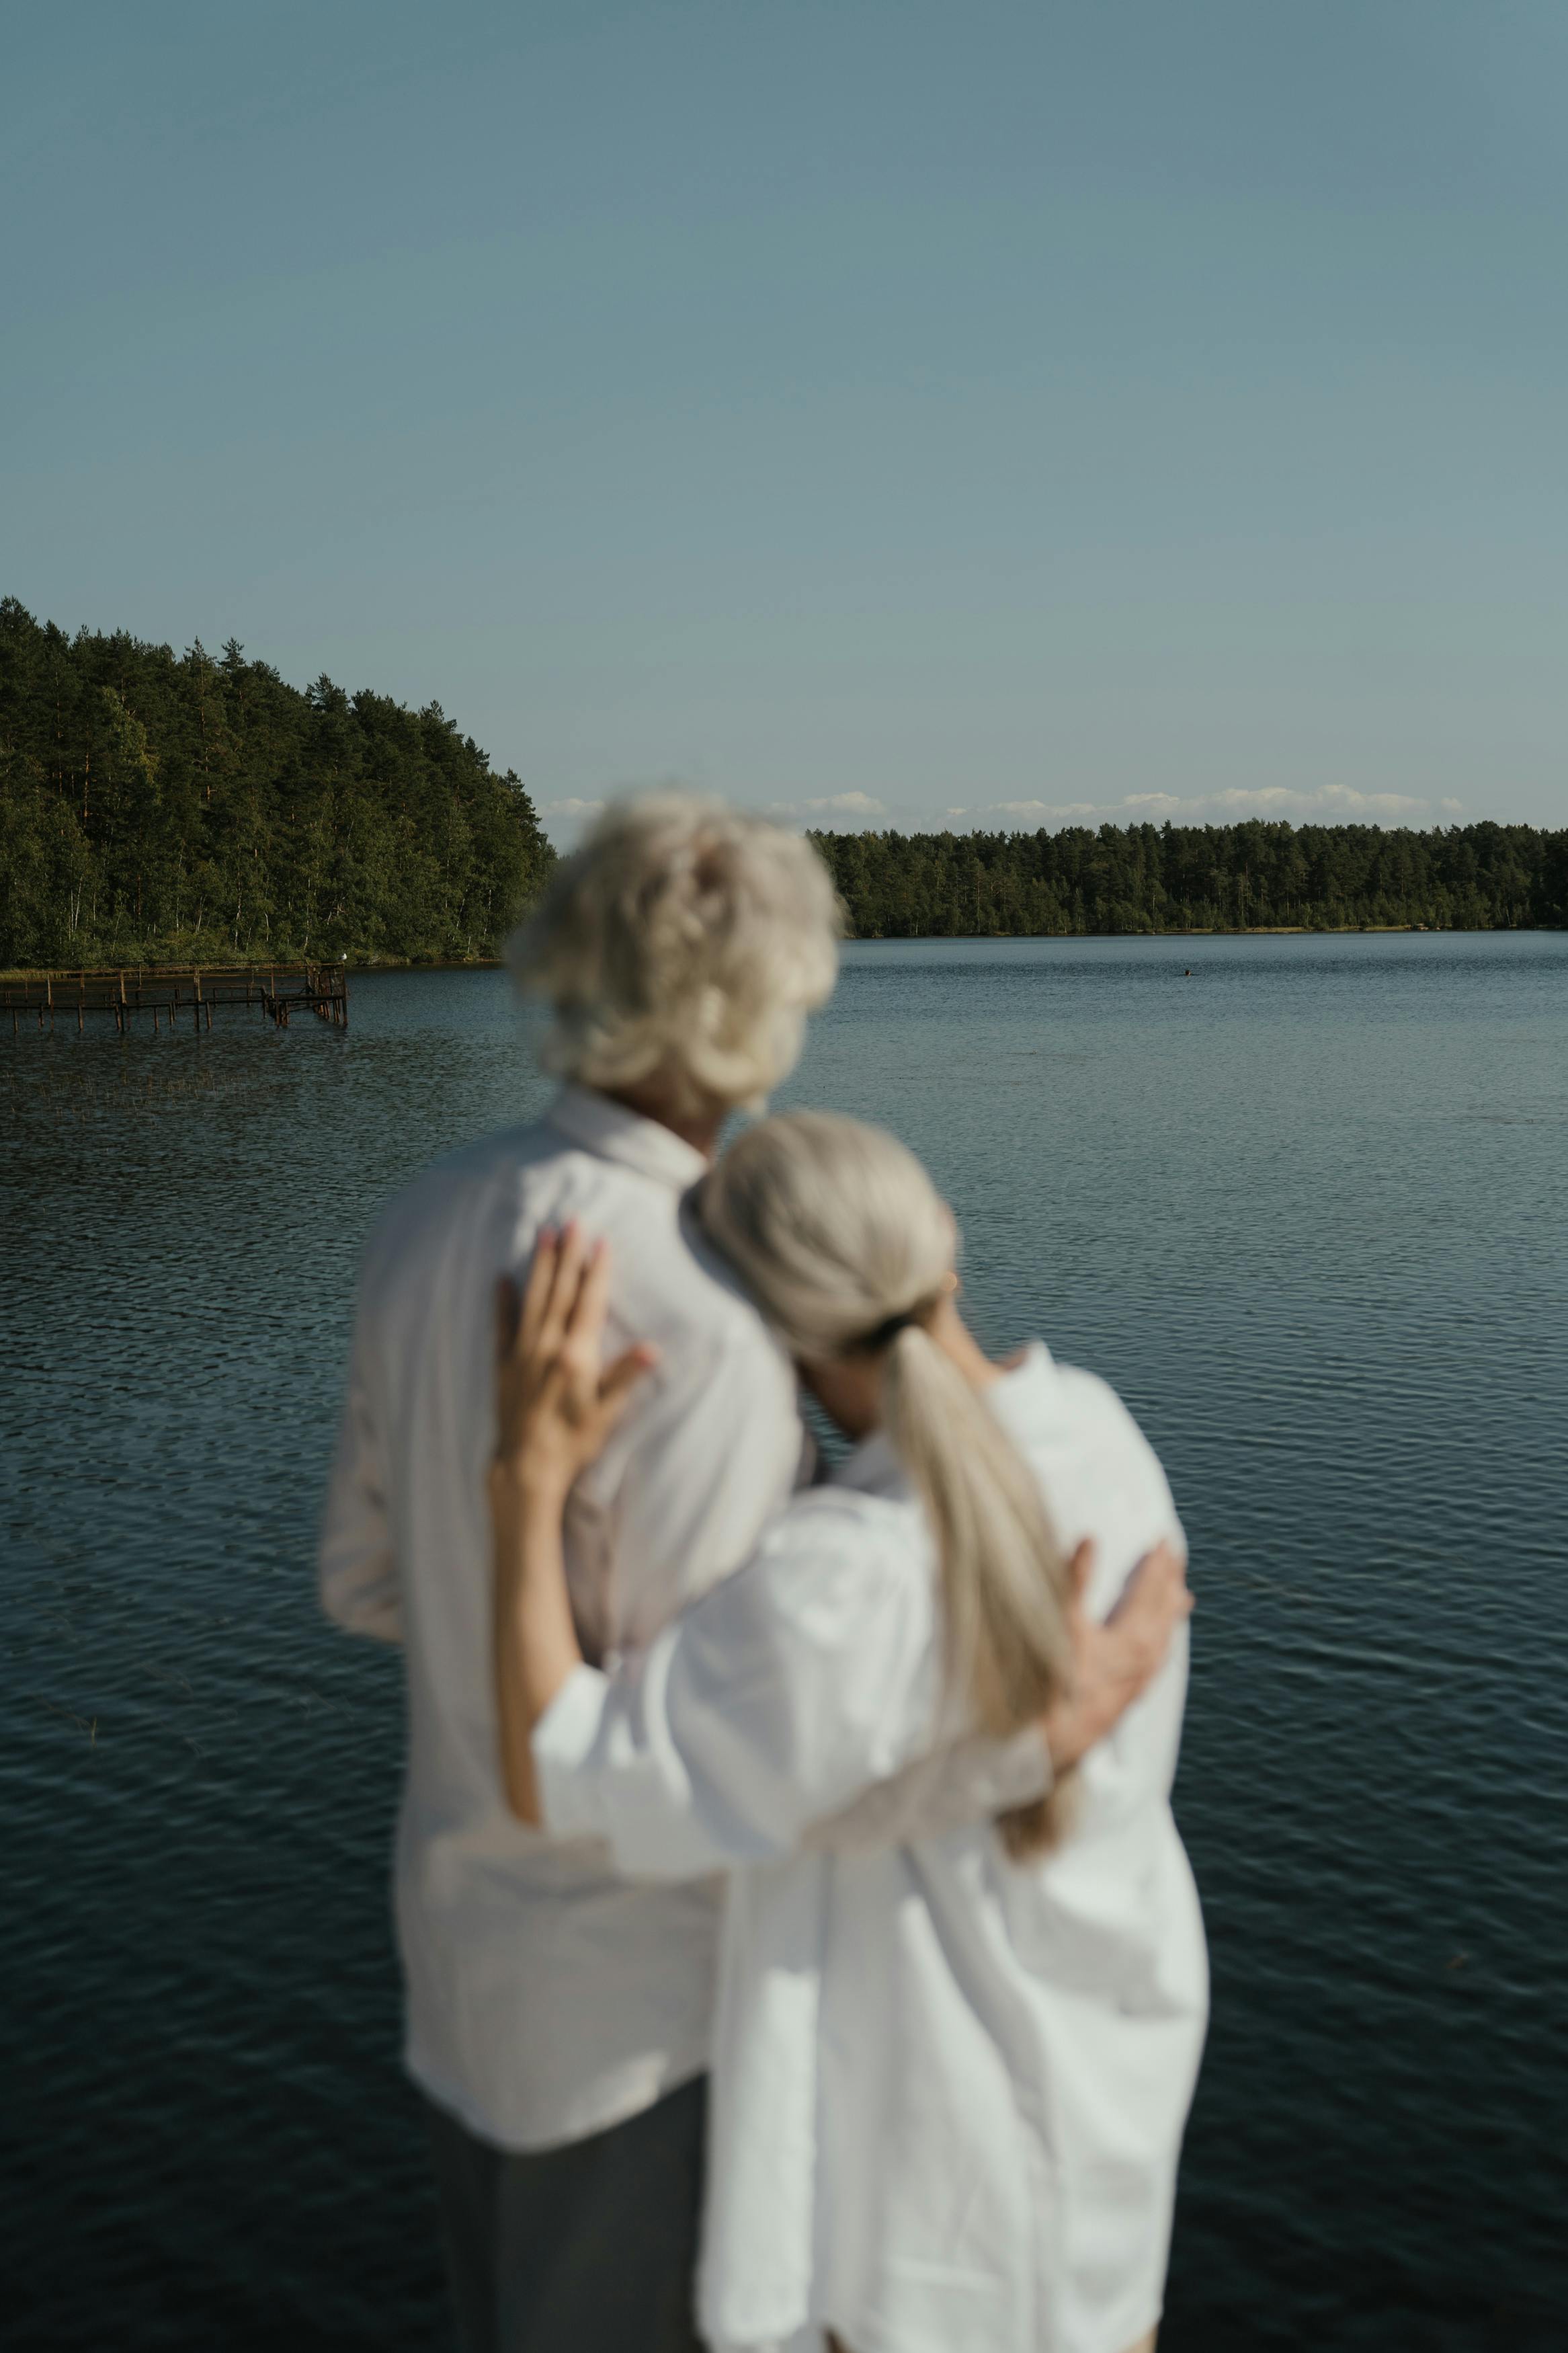 An older couple embracing while facing a lake | Source: Pexels